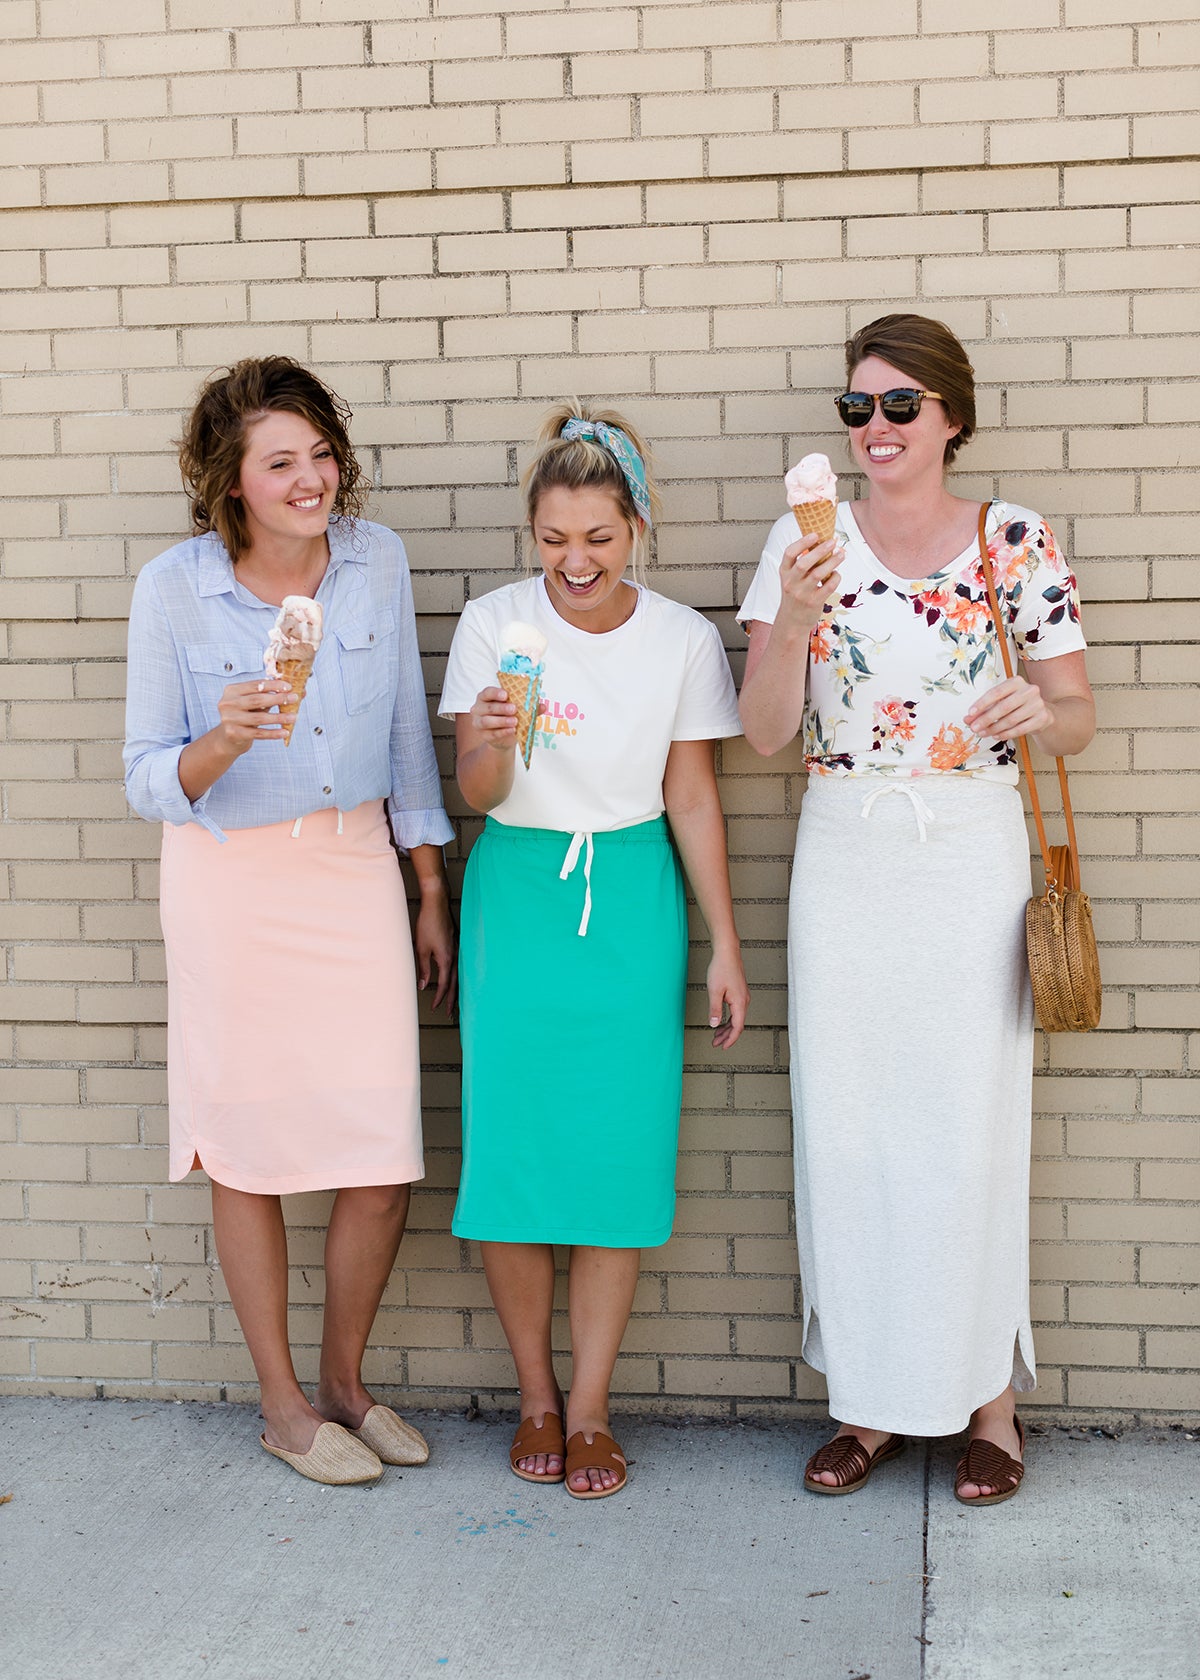 Emerald, coral, and gray midi and maxi modest skirts